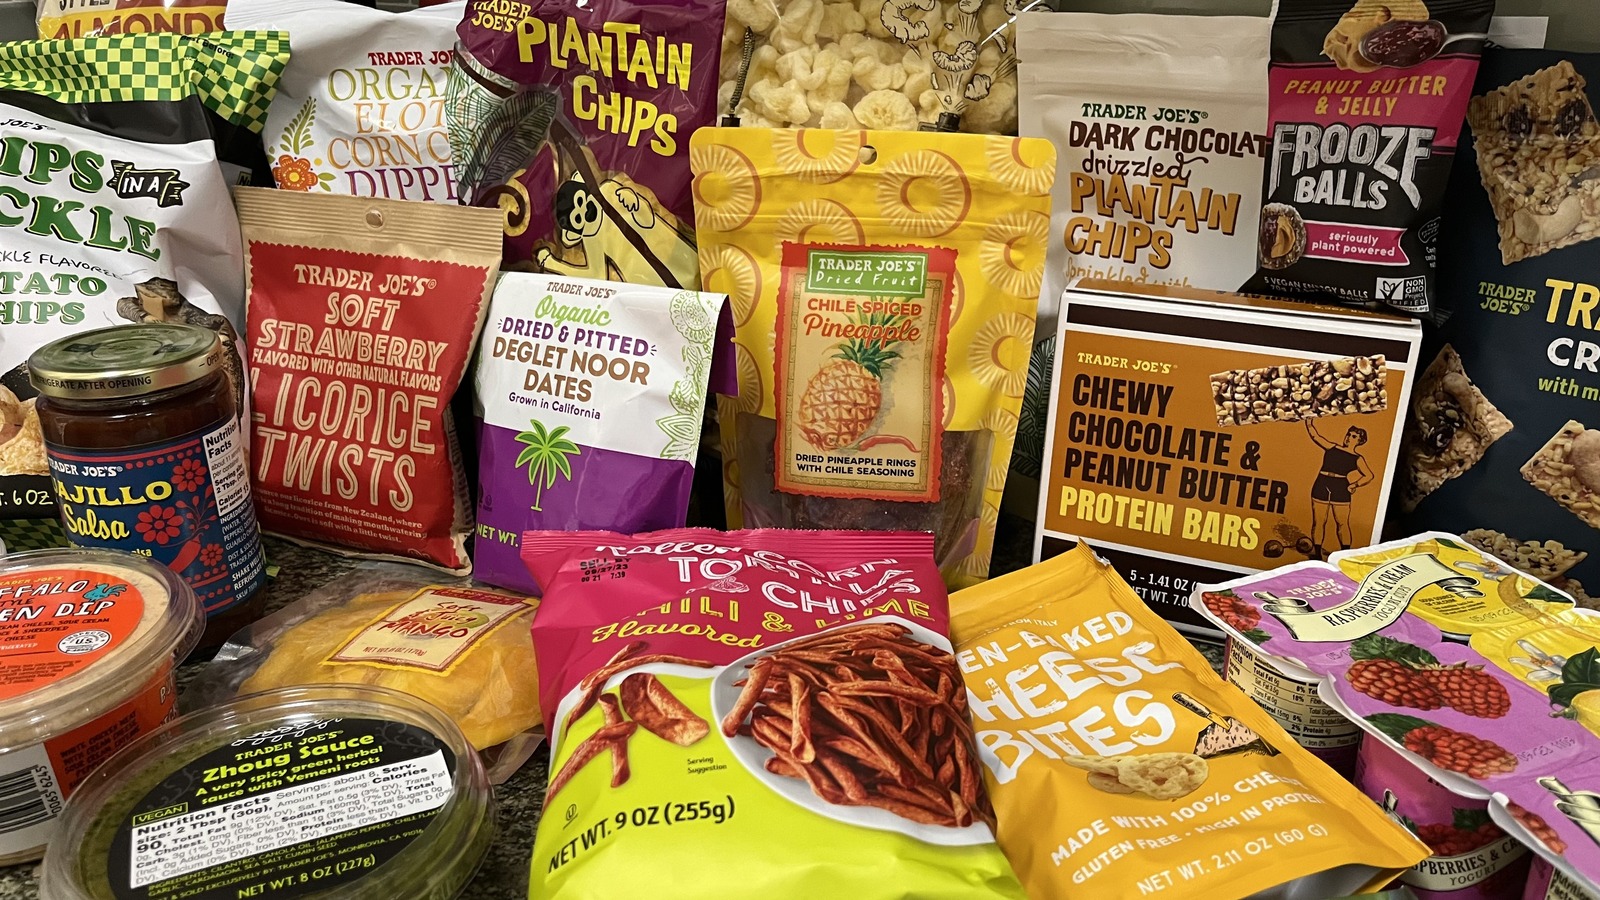 https://www.thedailymeal.com/img/gallery/26-best-trader-joes-snacks-ranked-upgrade/l-intro-1681496216.jpg